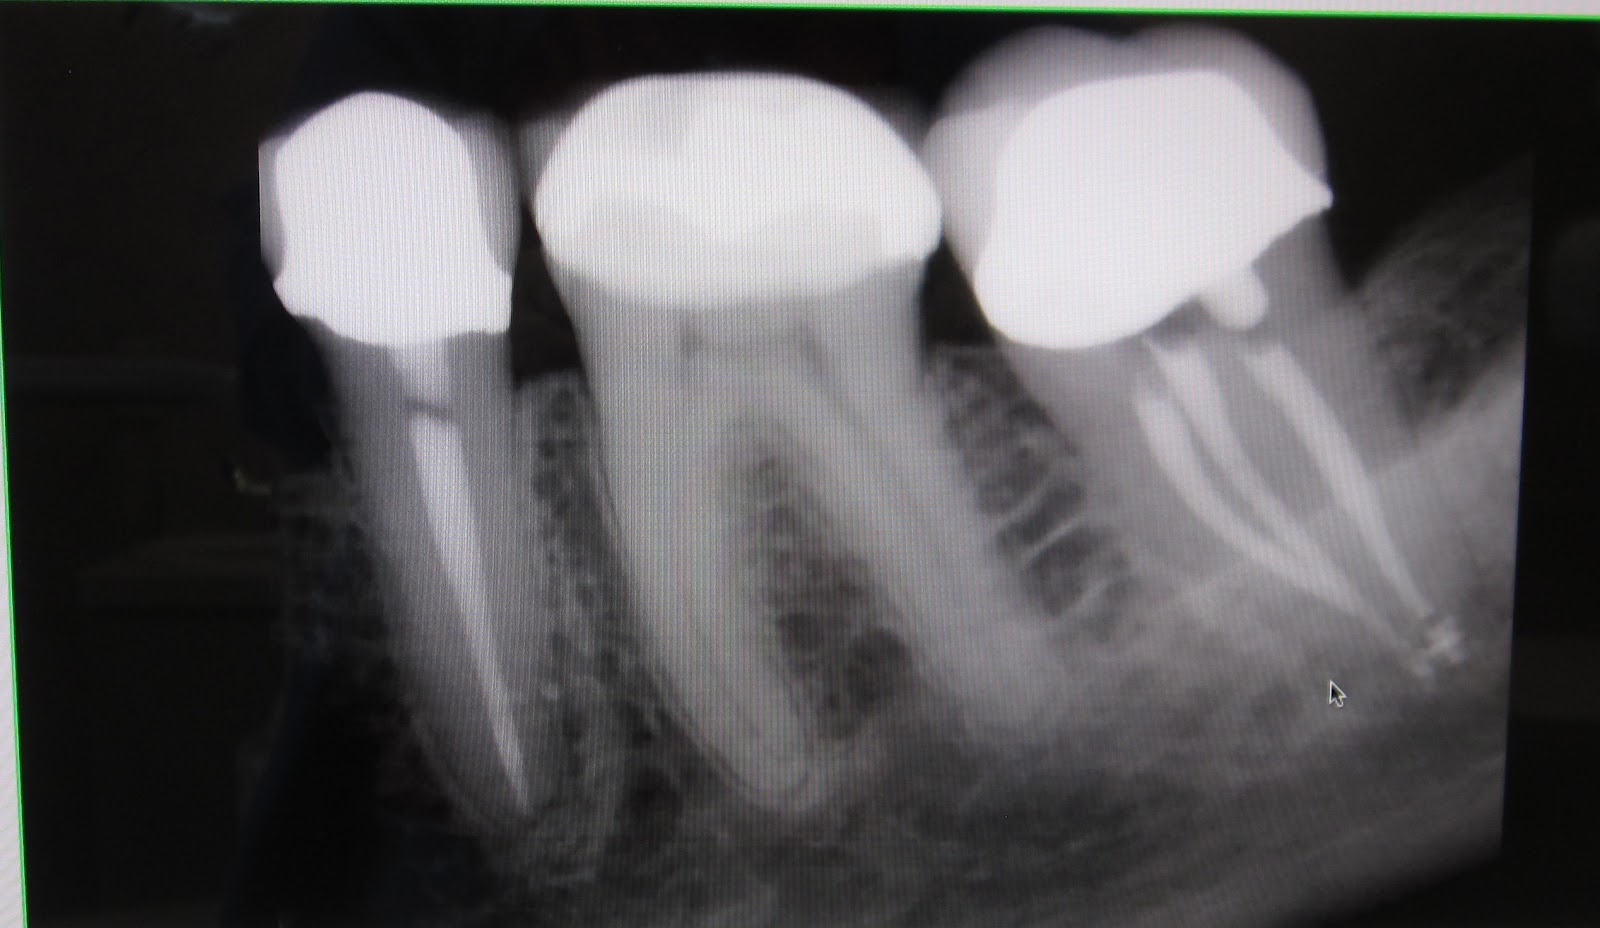 Root canal xray - hacjp